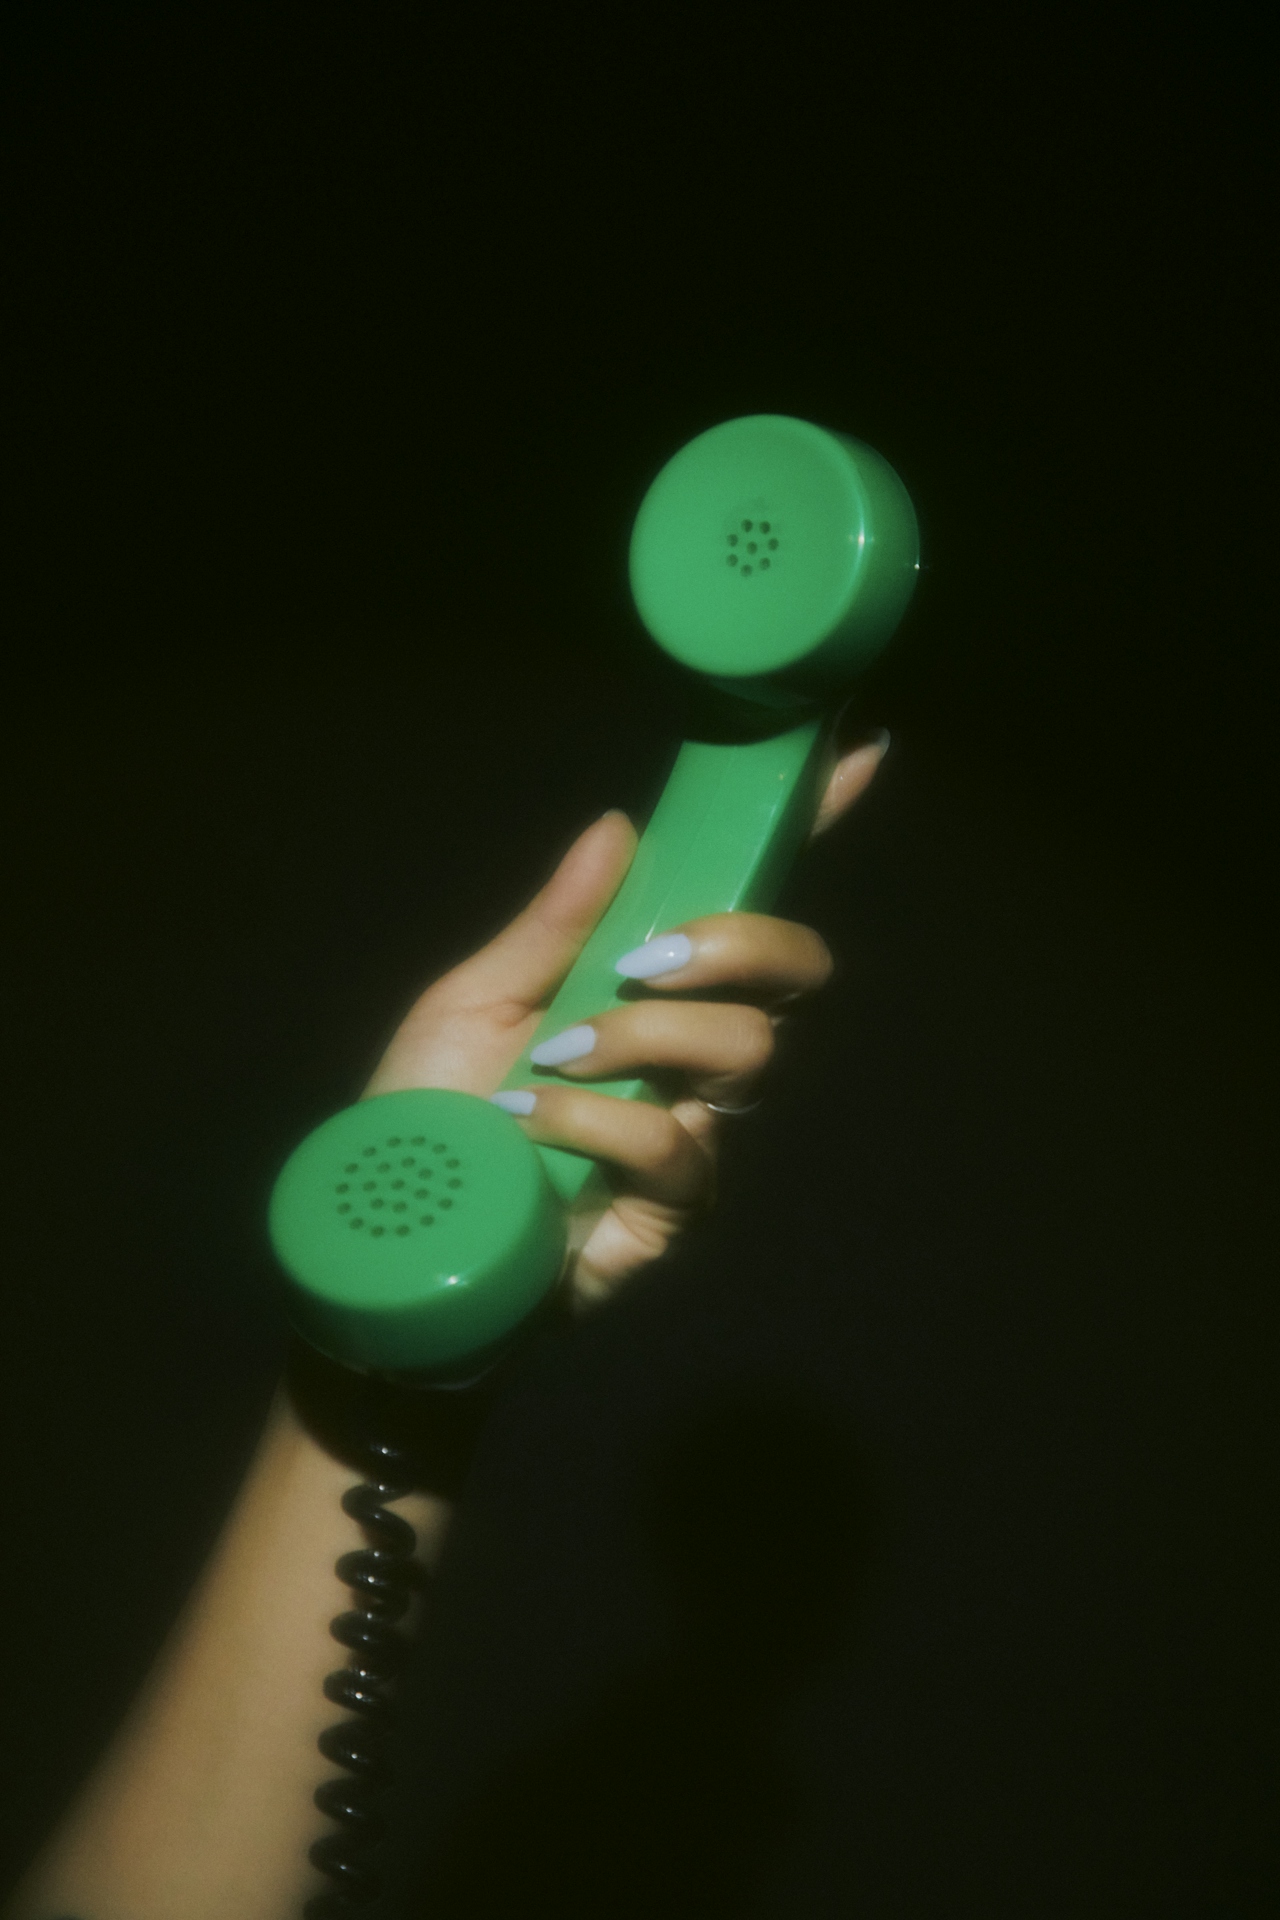 A photo of a hand holding a green phone against a black background used as the promotional photo for a blog post from Cool Copy Club about why brand messaging strategy is important for personal brands.